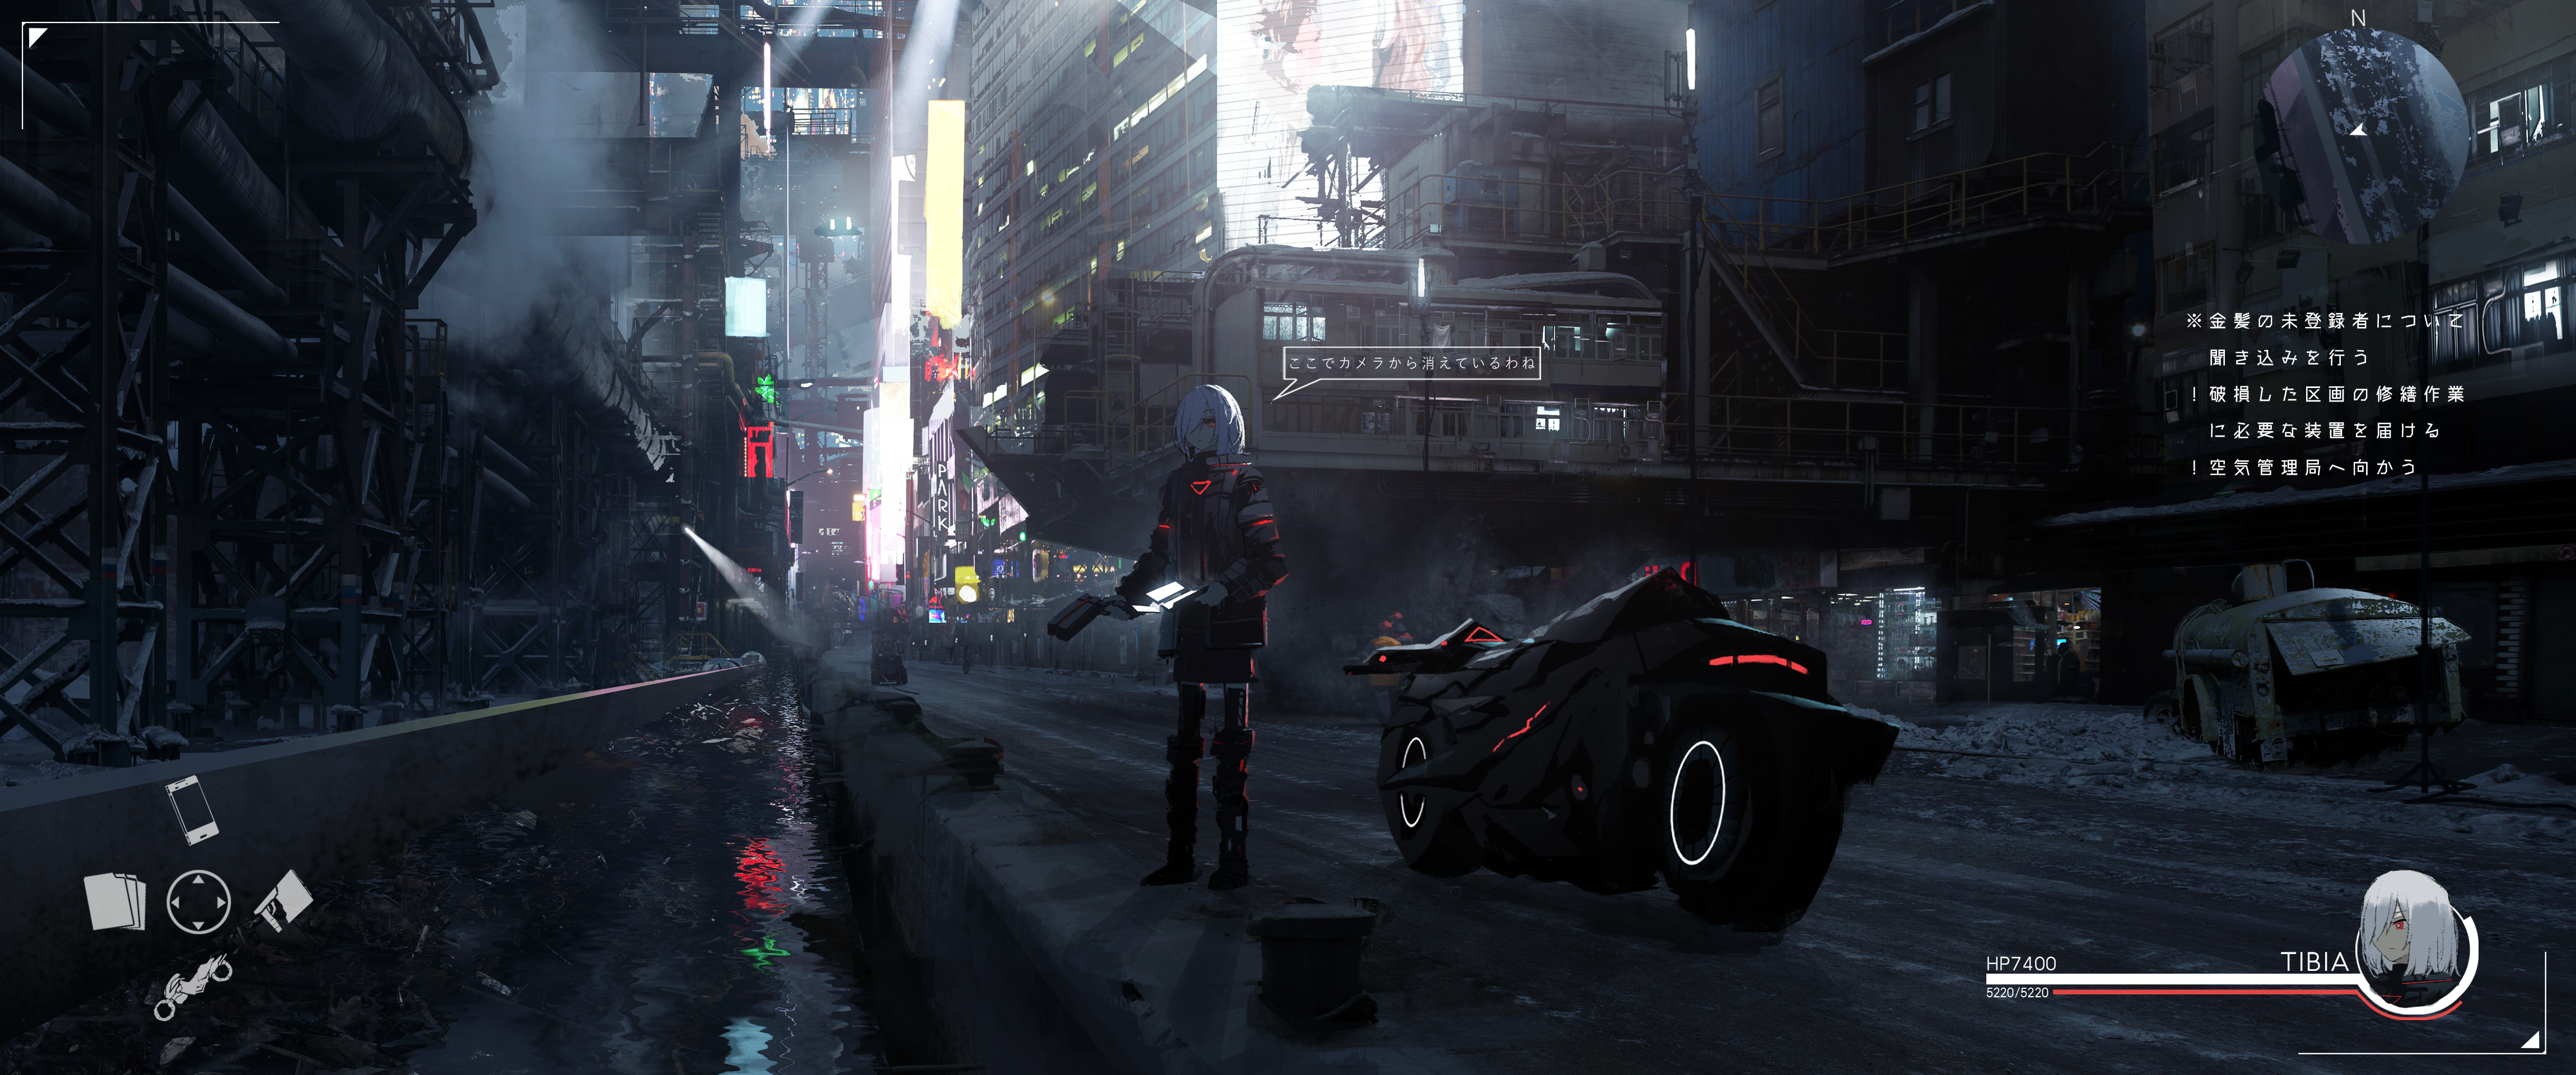 Anime 4600x1920 cyberpunk futuristic anime motorcycle women with motorcycles futuristic city science fiction science fiction women anime games video game girls video game art red eyes vehicle cityscape street